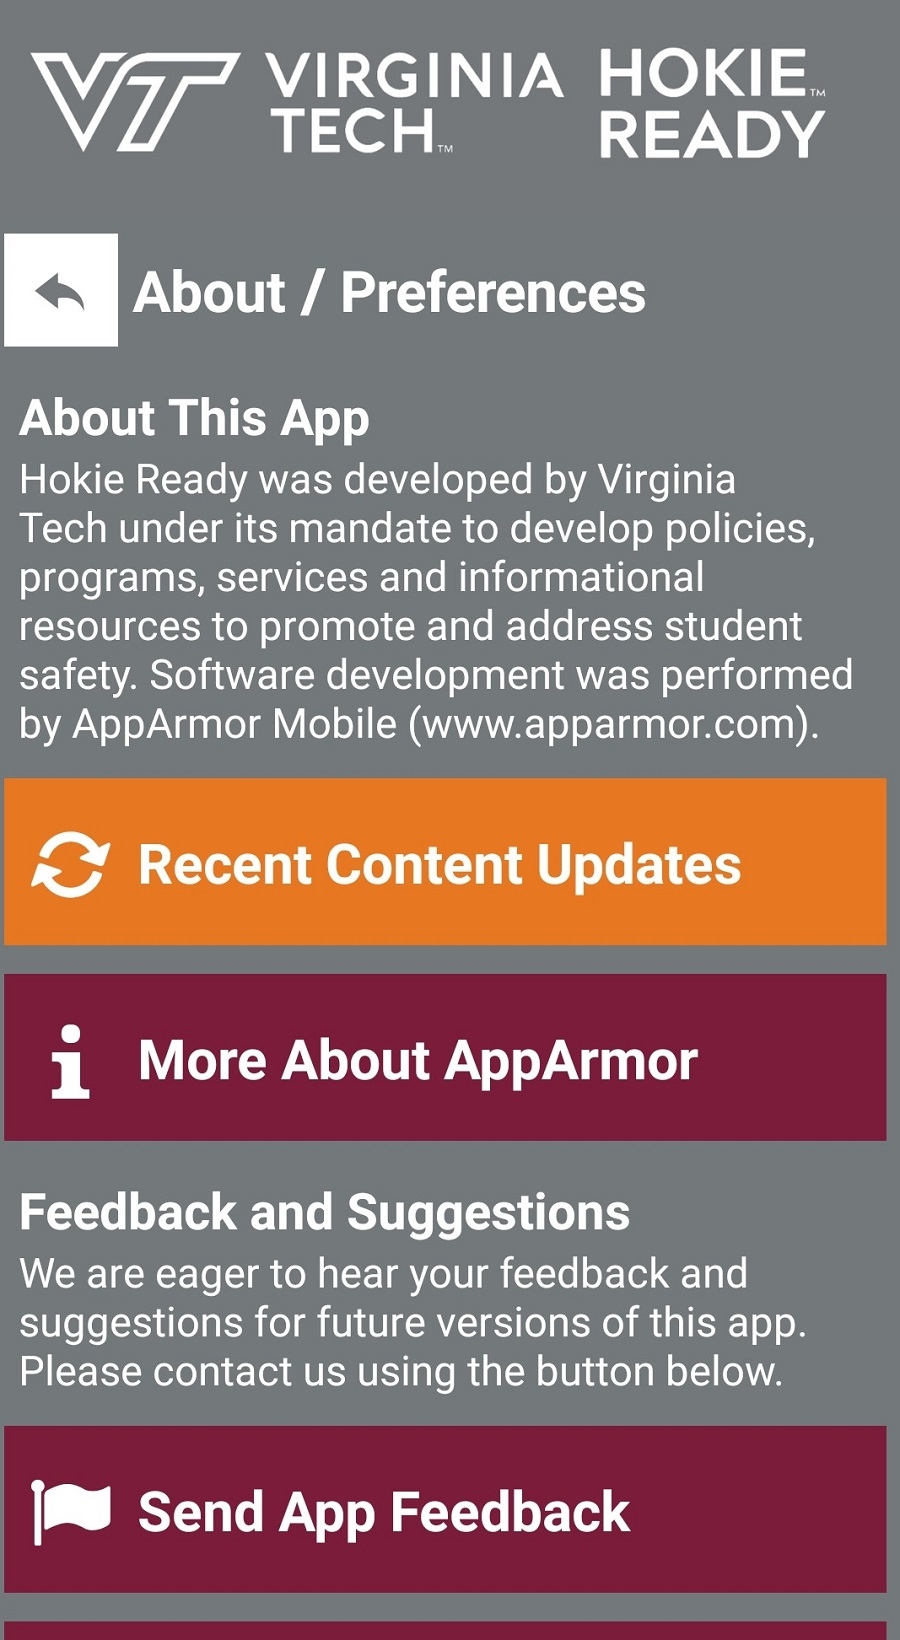 Screenshot of the About/Preferences page within the Hokie Ready app